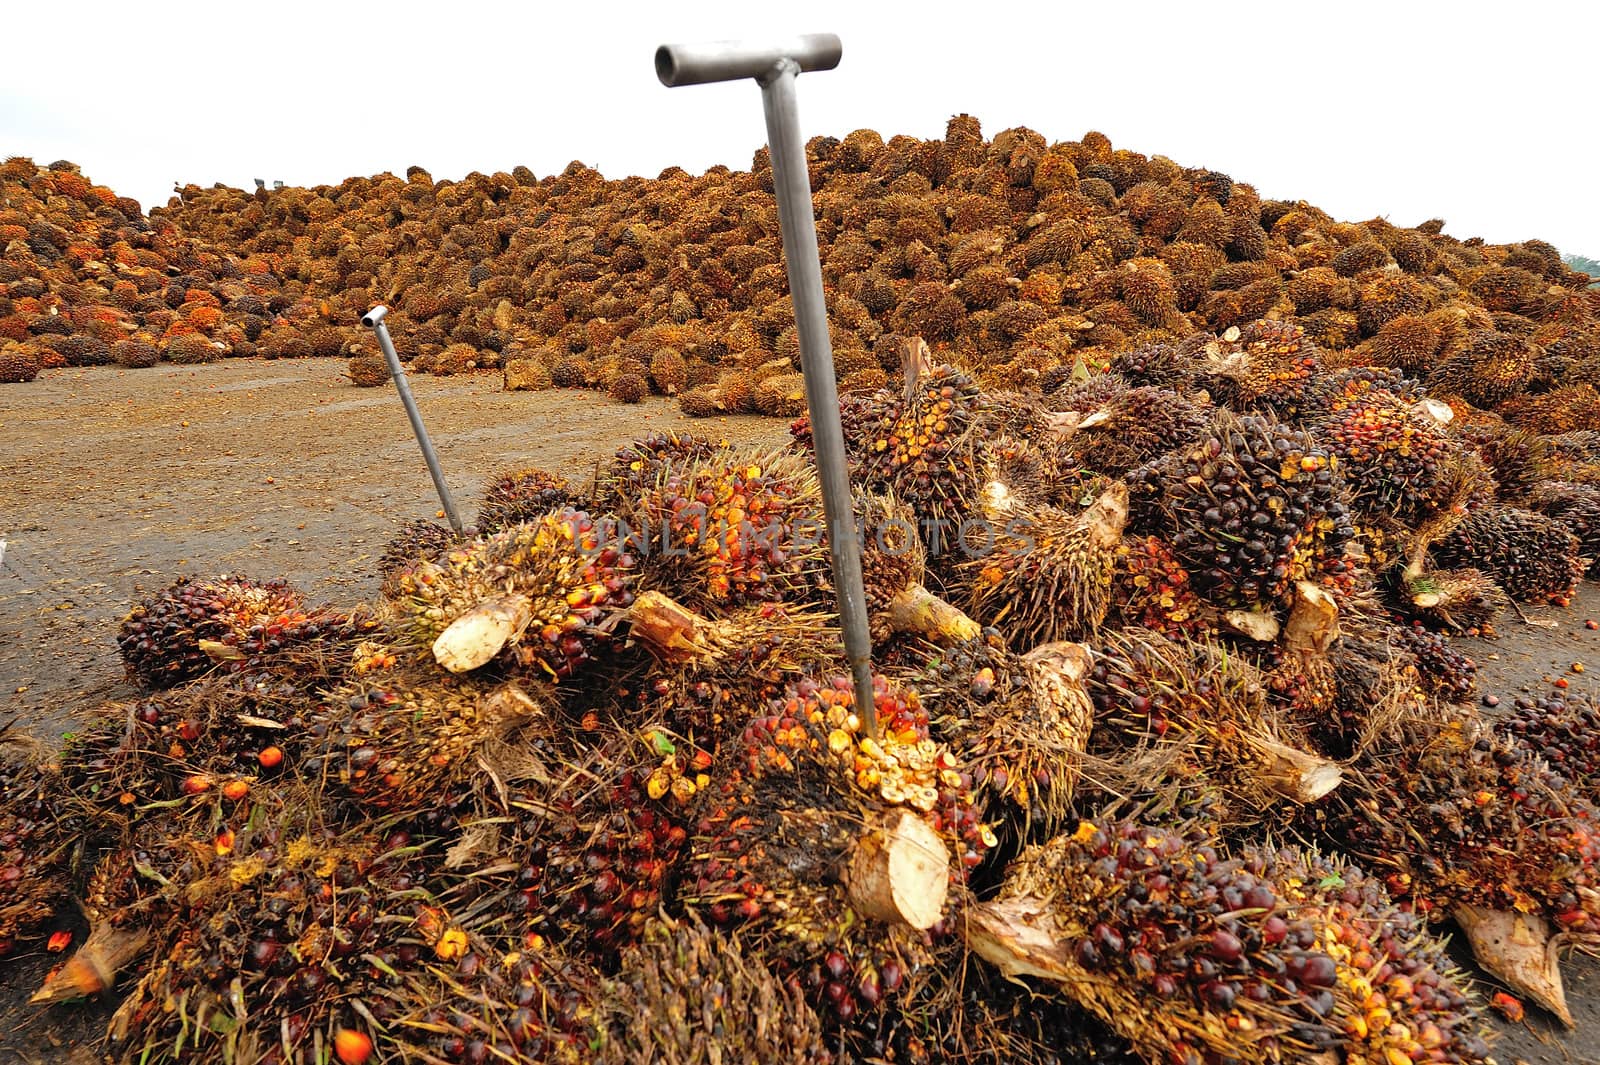 Palm Oil Fruits on the floor by think4photop